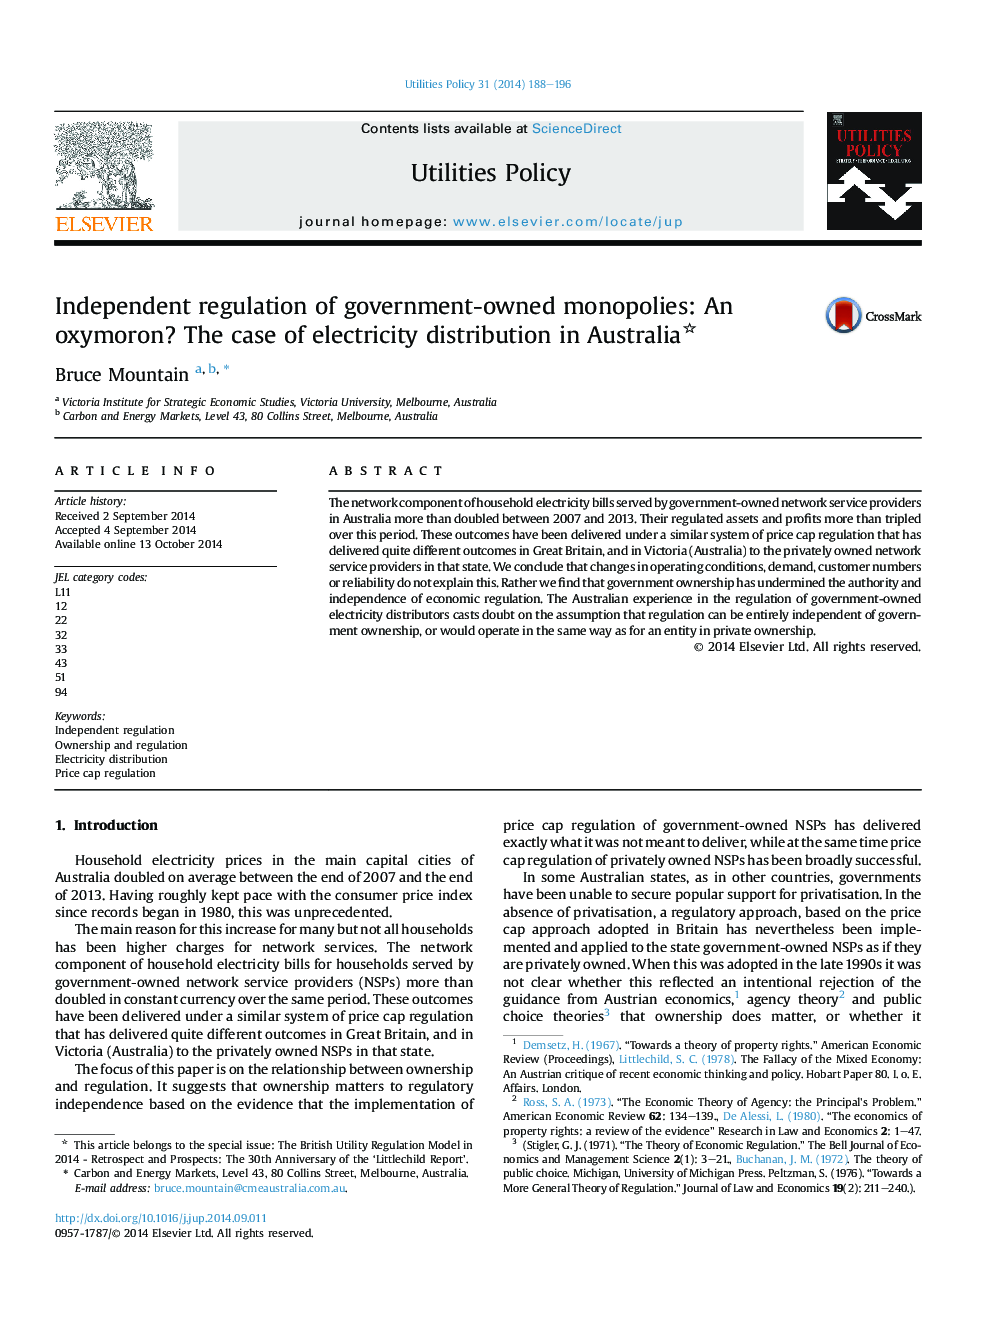 Independent regulation of government-owned monopolies: An oxymoron? The case of electricity distribution in Australia